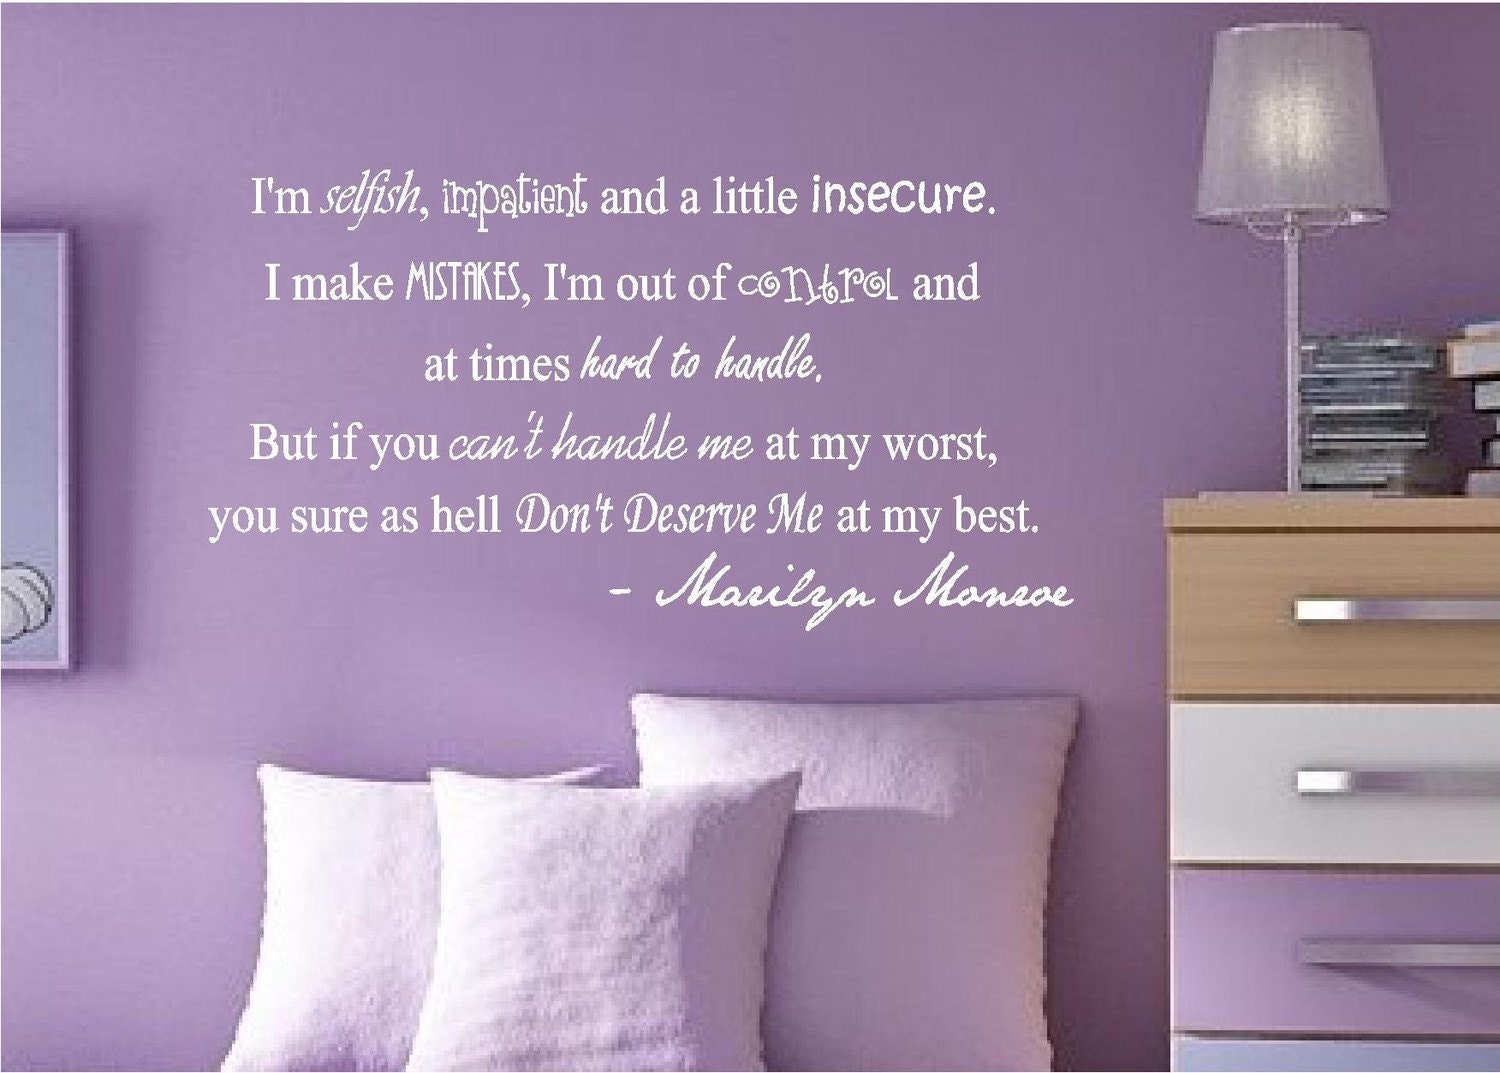 Marilyn Monroe Quote Vinyl Wall Decal Sticker by 